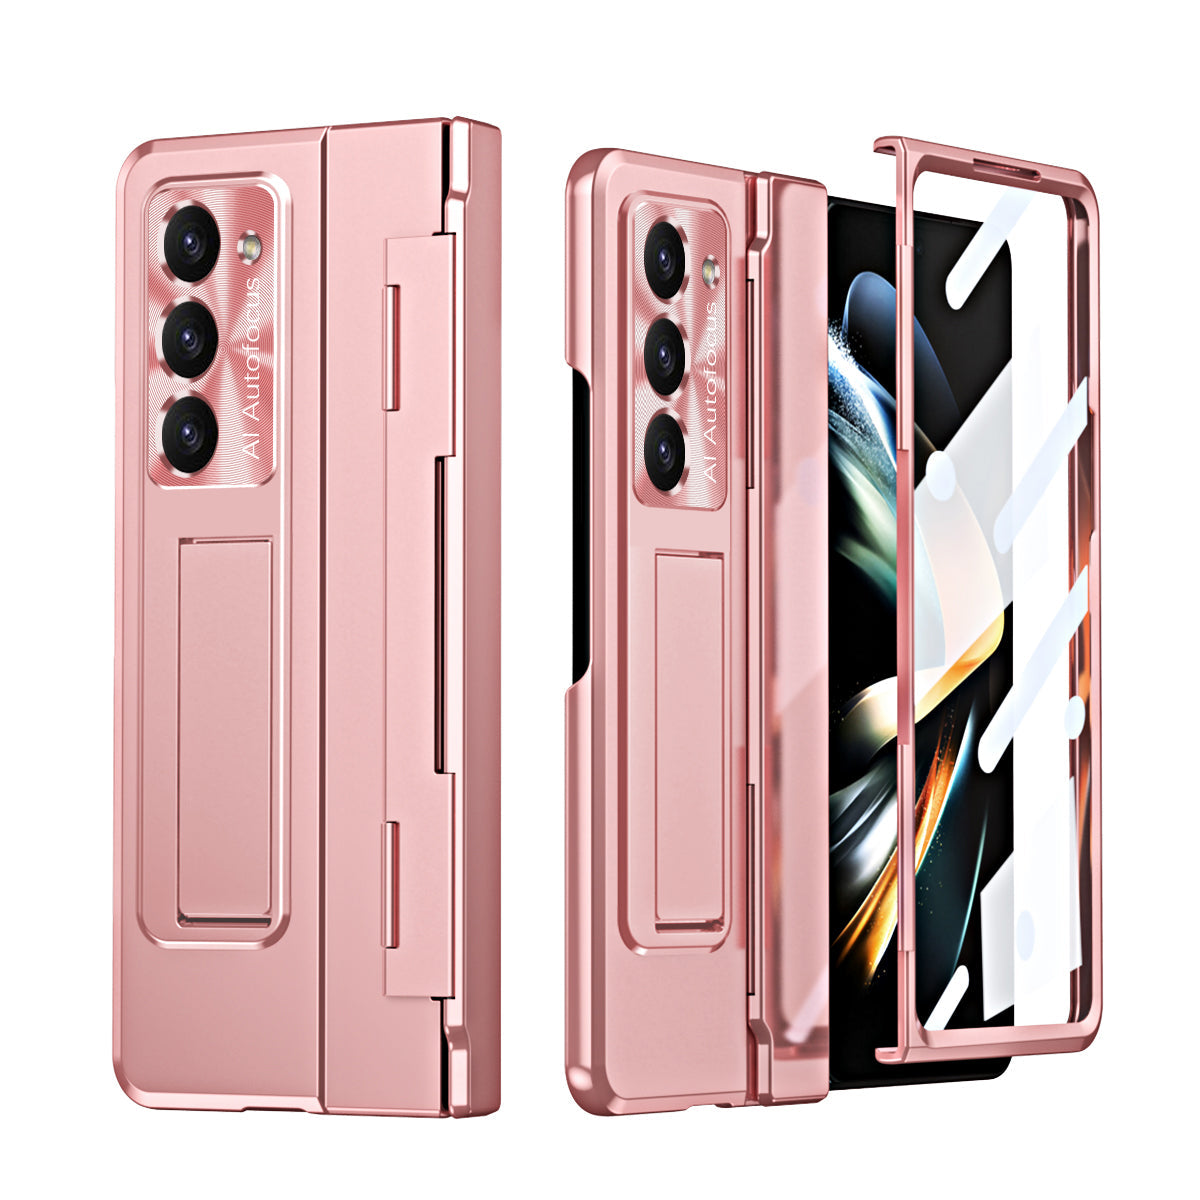 Golden Armor Hinge Magnetic Bracket Protective Phone Case With Front Protection Film For Samsung Galaxy Z Fold5 Fold4 Fold3